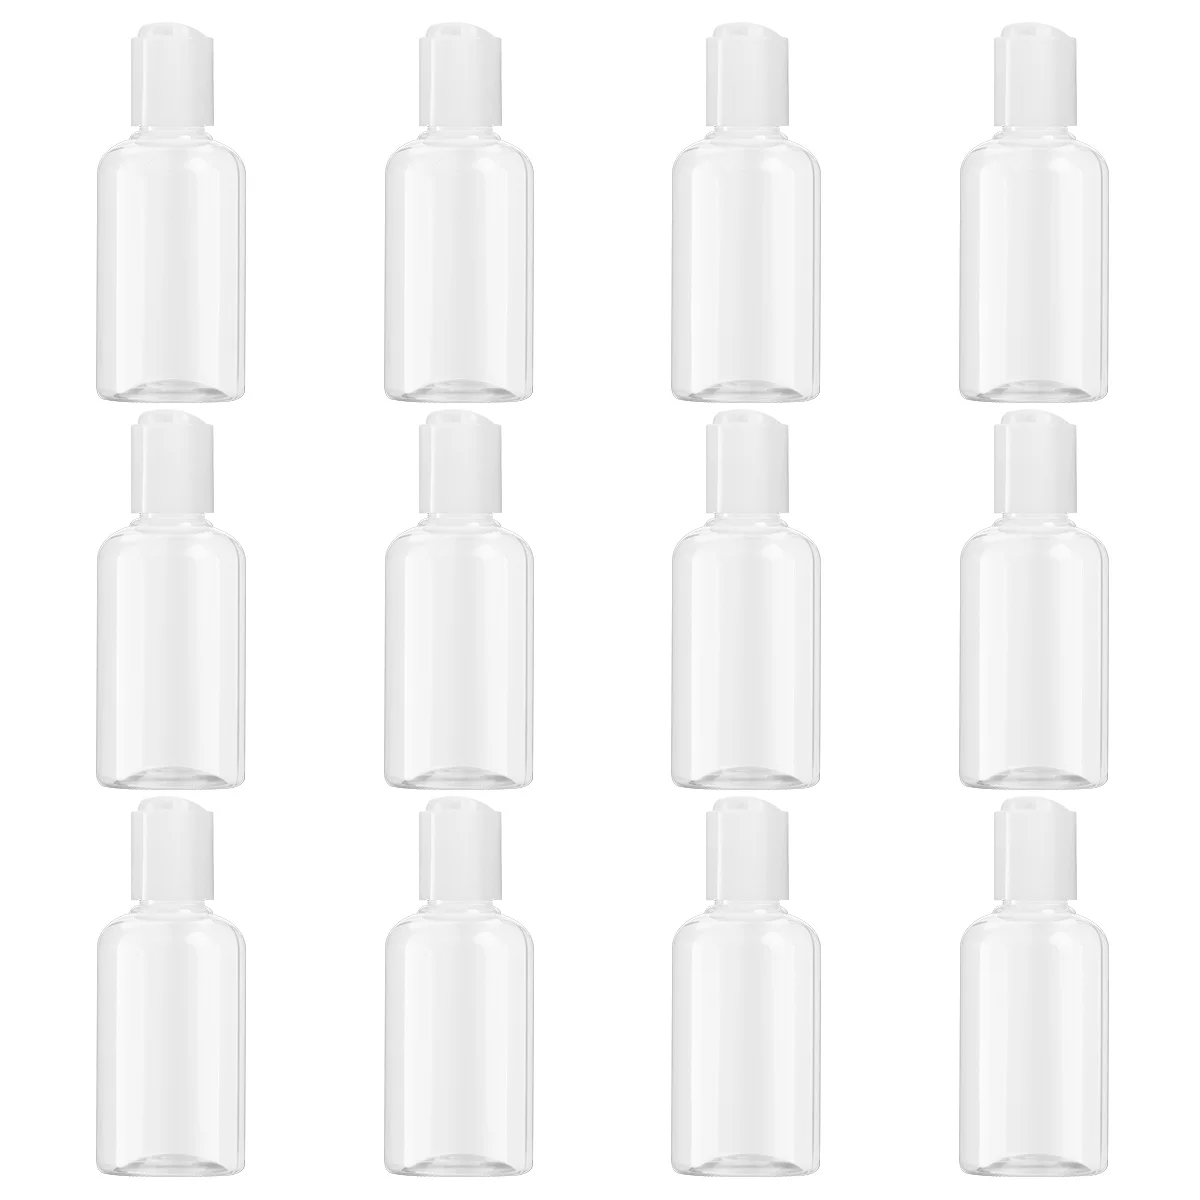 

12pcs Refillable Bottle 75ml Press Cap Travel Bottle Empty Toiletry Bottles Storage Container for Shampoo Lotion Containers